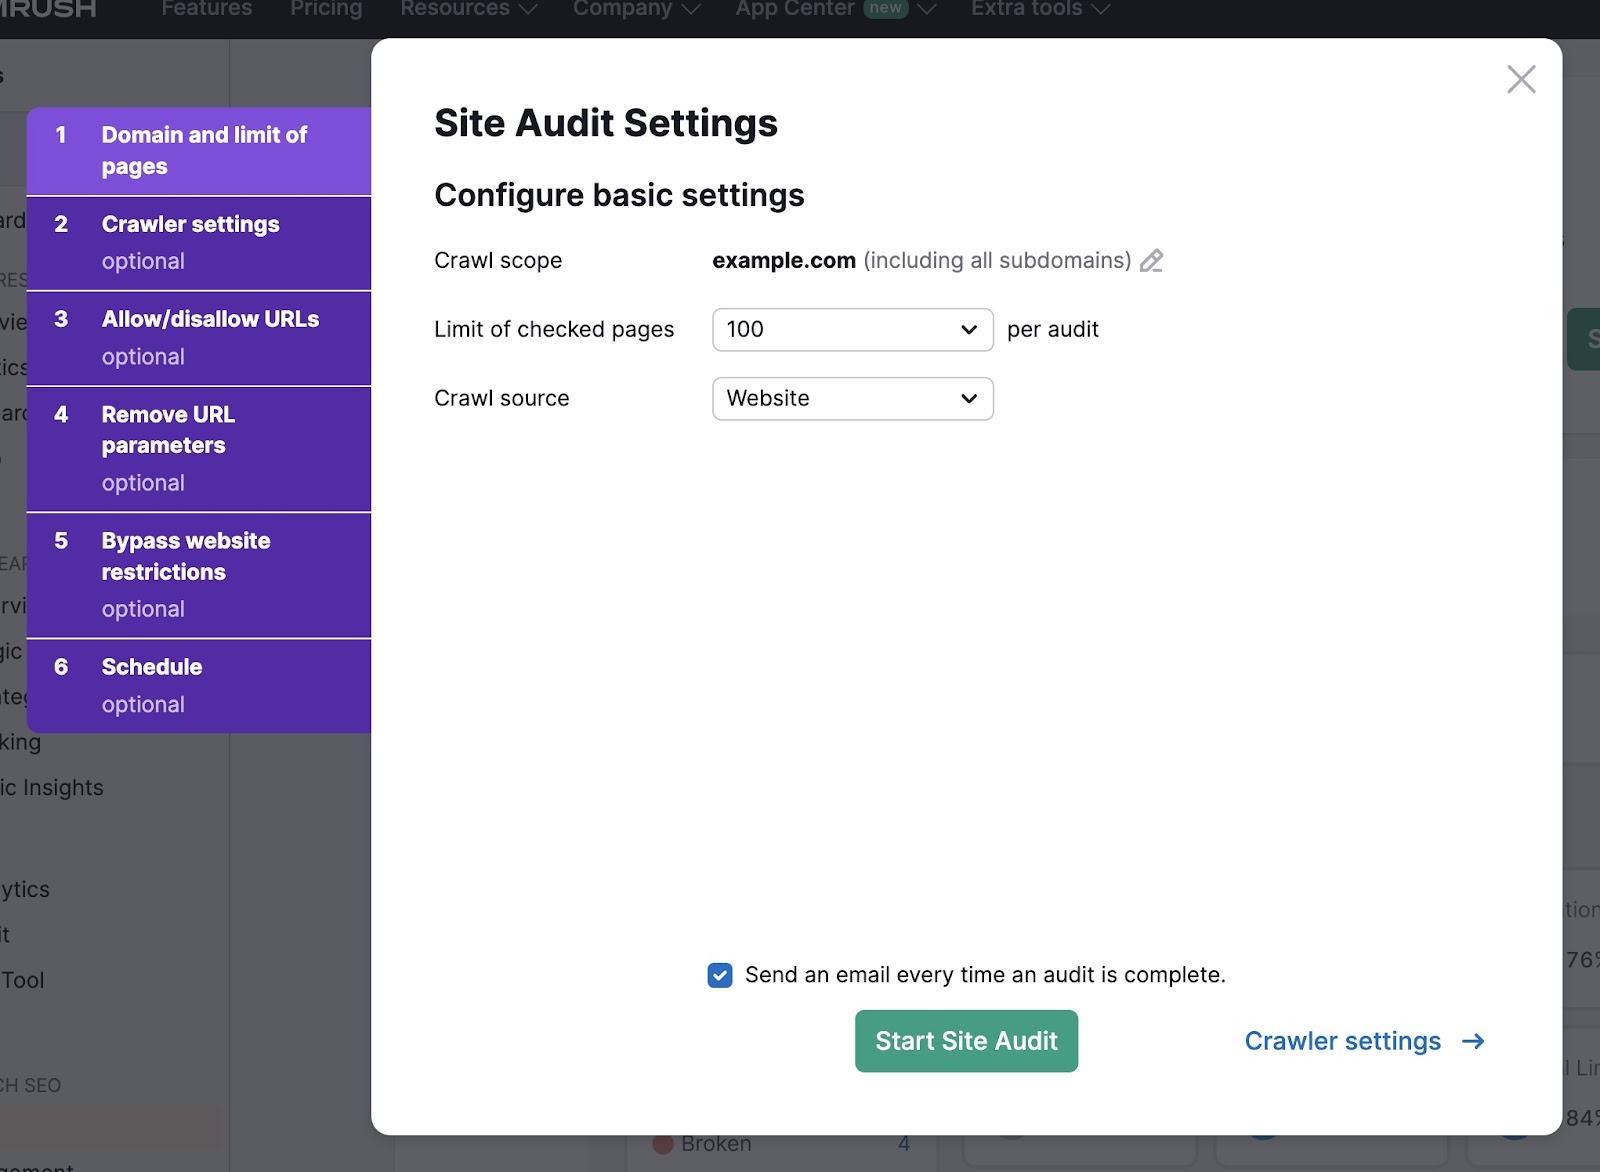 Basic settings page on Site Audit to set crawl scope, source, and limit of checked pages.